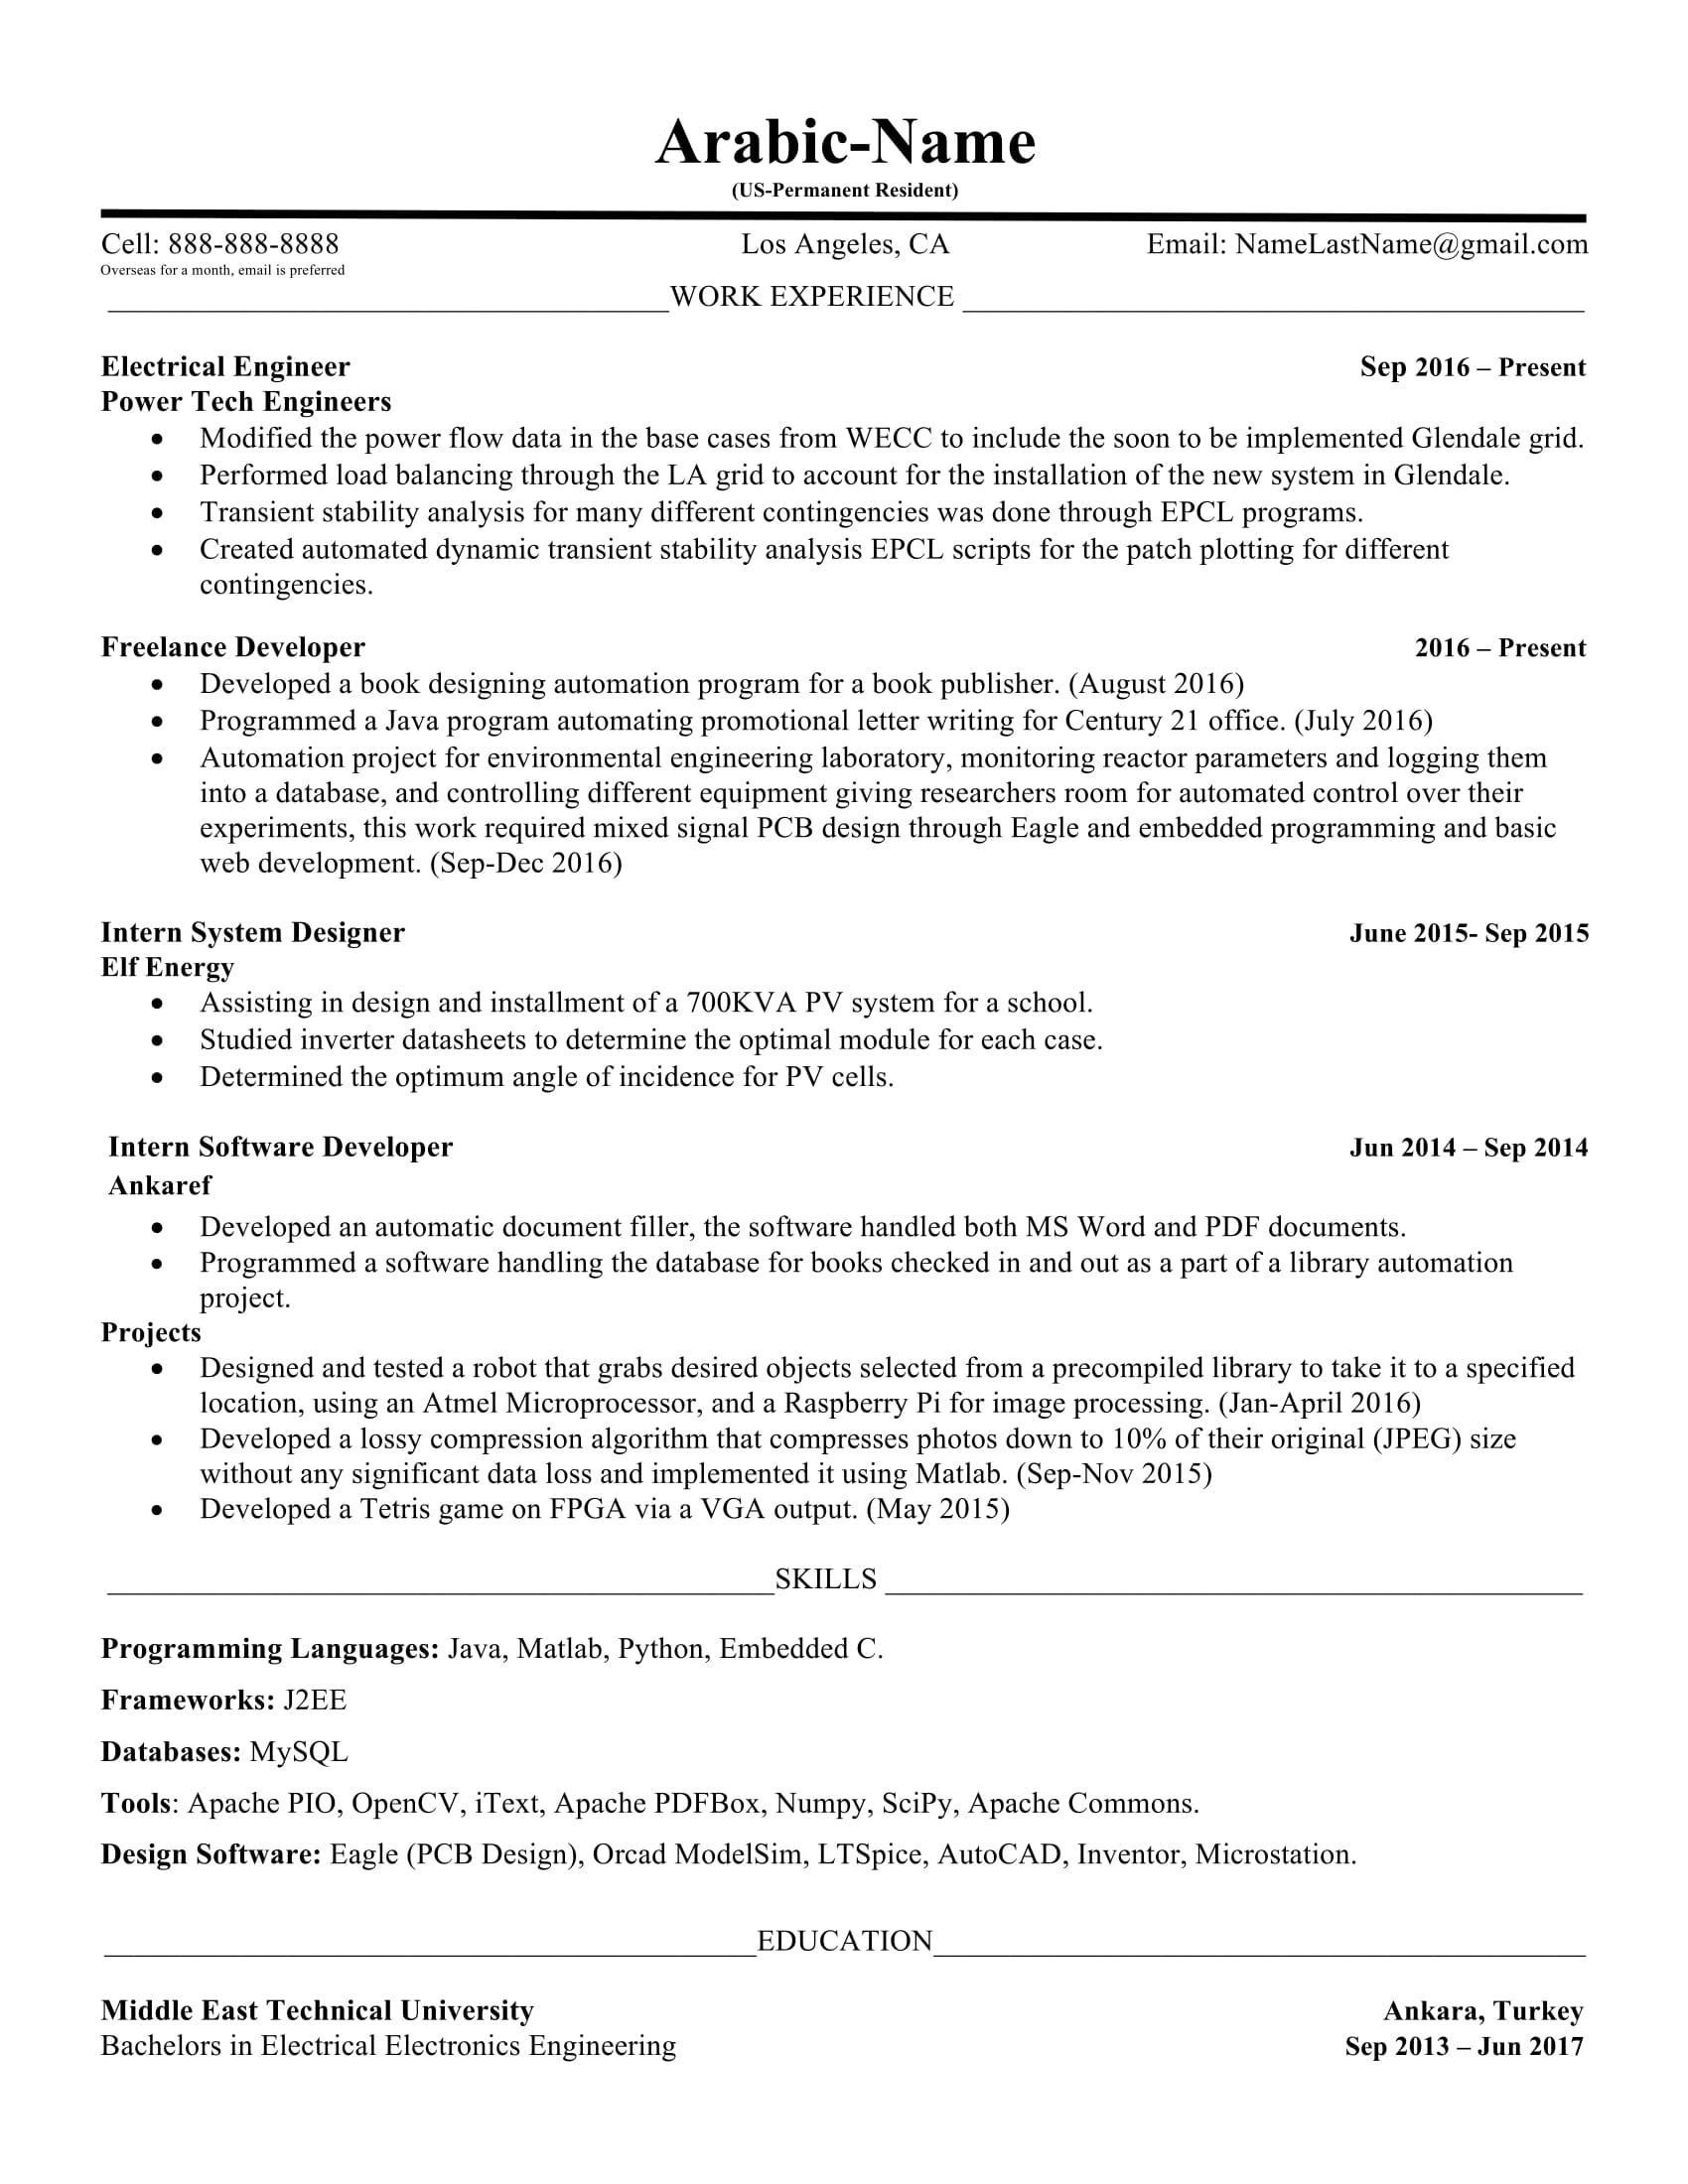 Resume Objective Statement Senior Engineer Electrical Resume Objective Example Free Unique Wallpapers Engineering Student Template Chemical Embedded Medical Assistant Format Word Entry Level resume objective statement|wikiresume.com